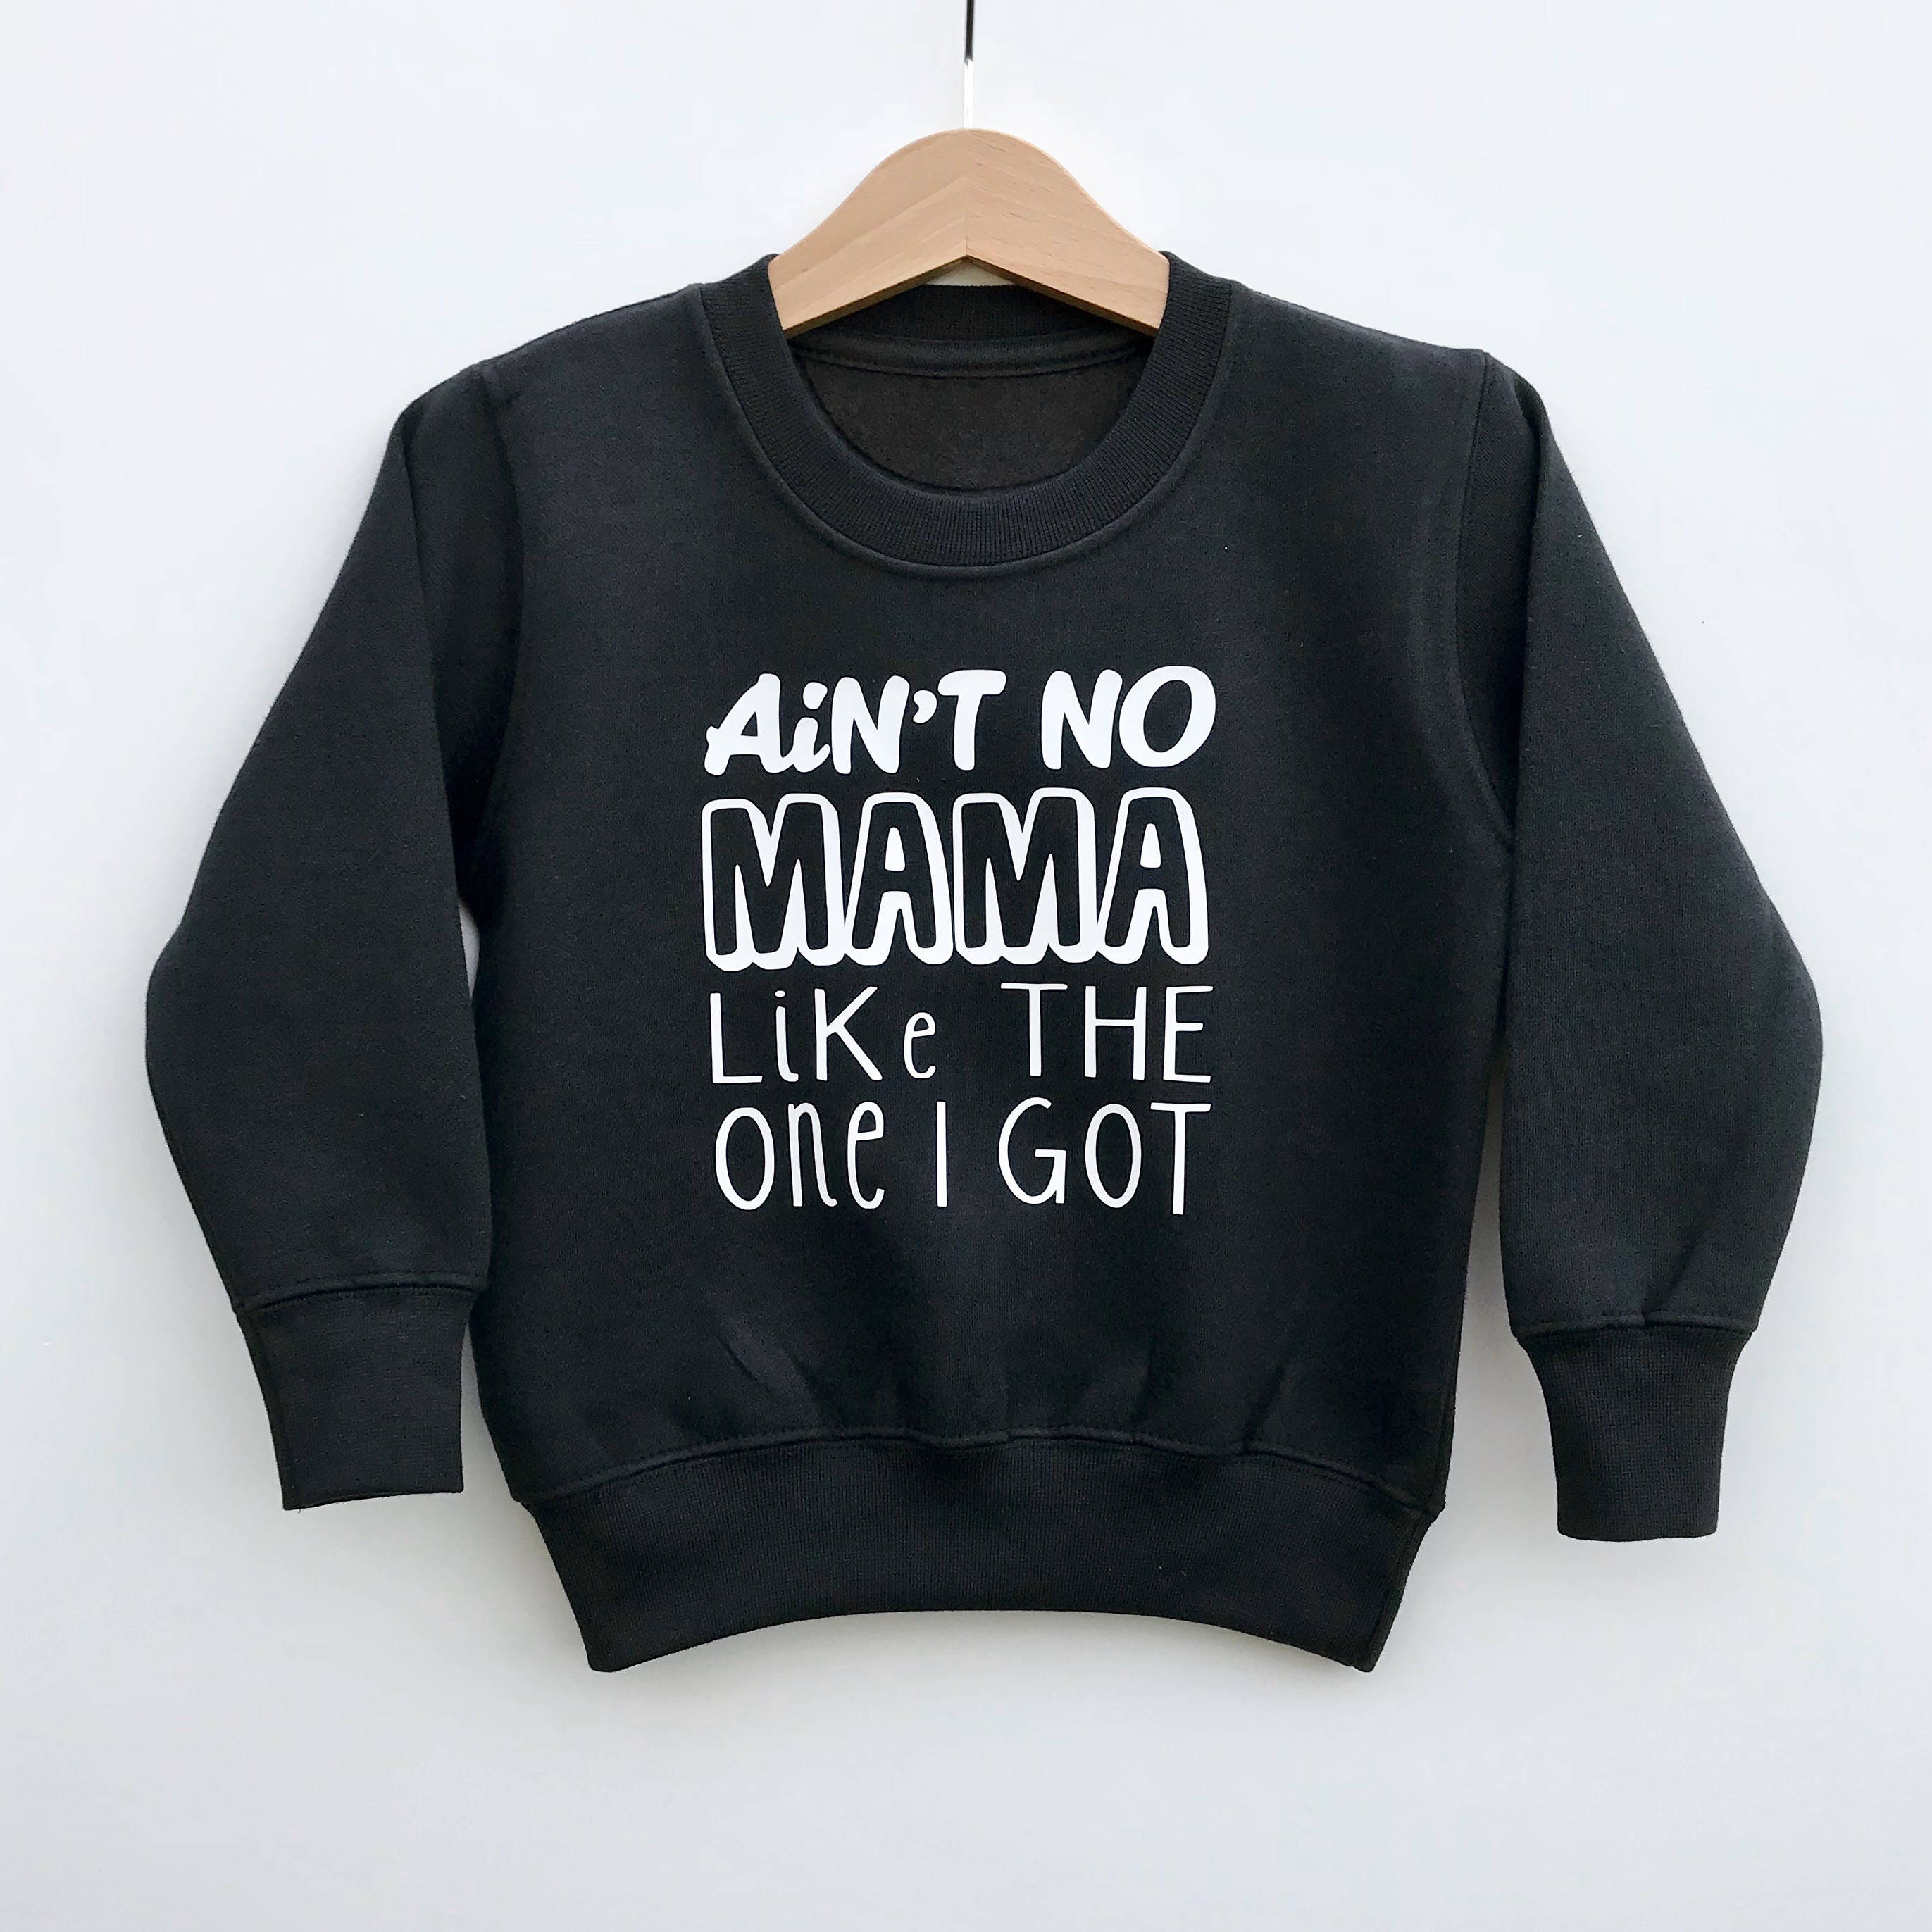 Aint No Mama Like The One I Got Pullover Hoodie Sweatshirt Mens Casual Workout Jacket Pullover